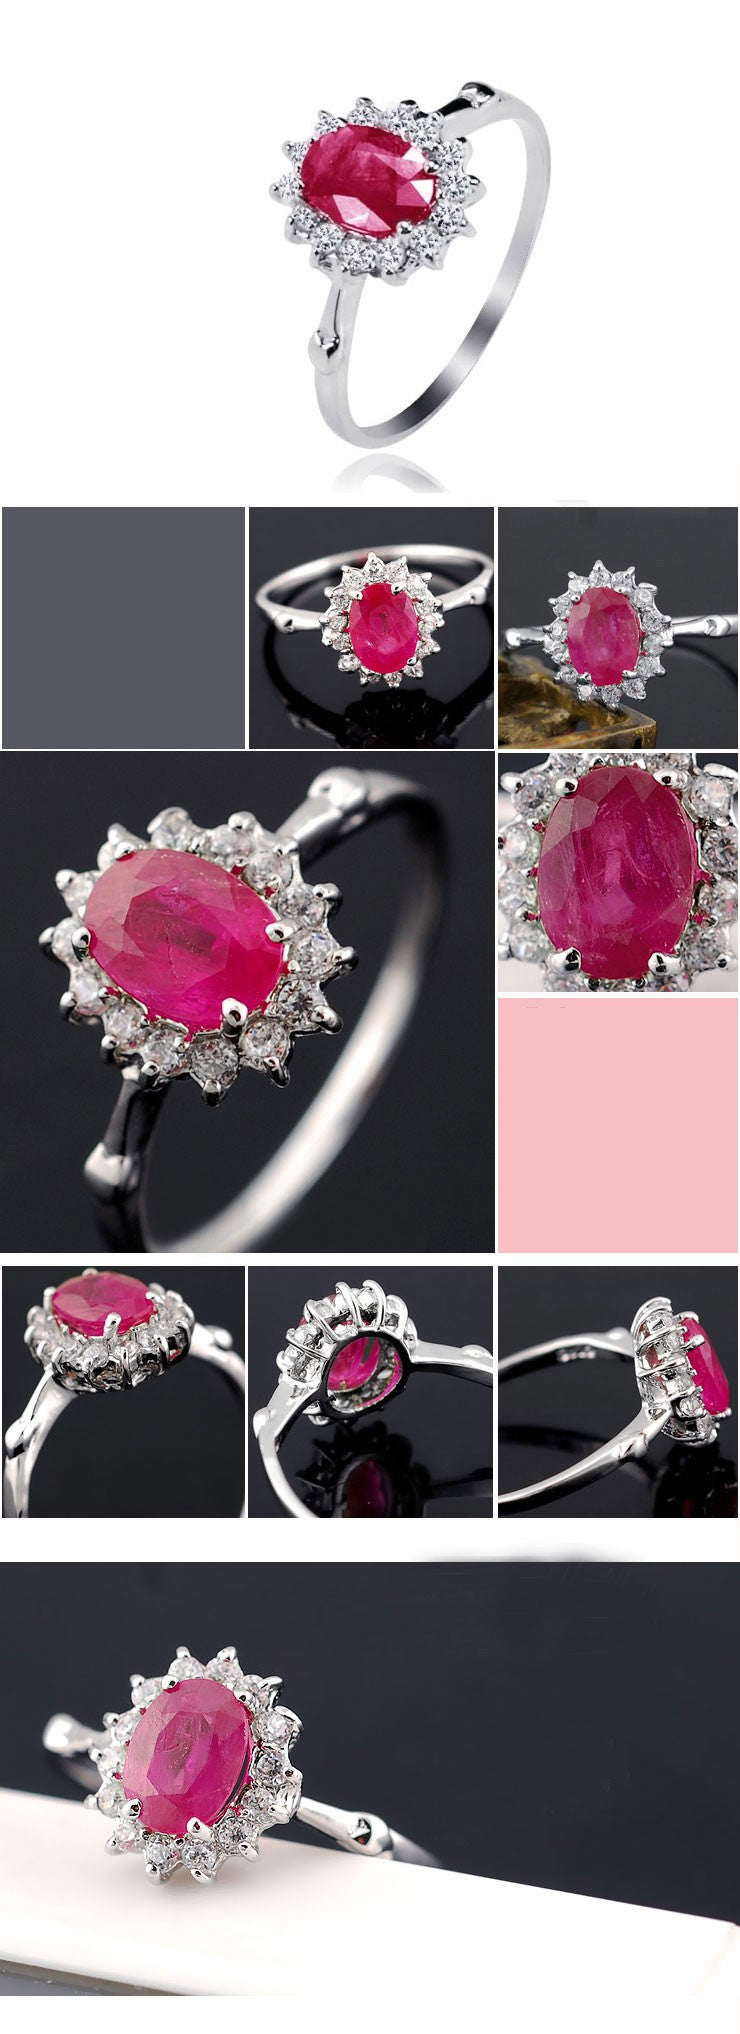 1 Carat Real Ruby Engagement Ring on 10k White Gold